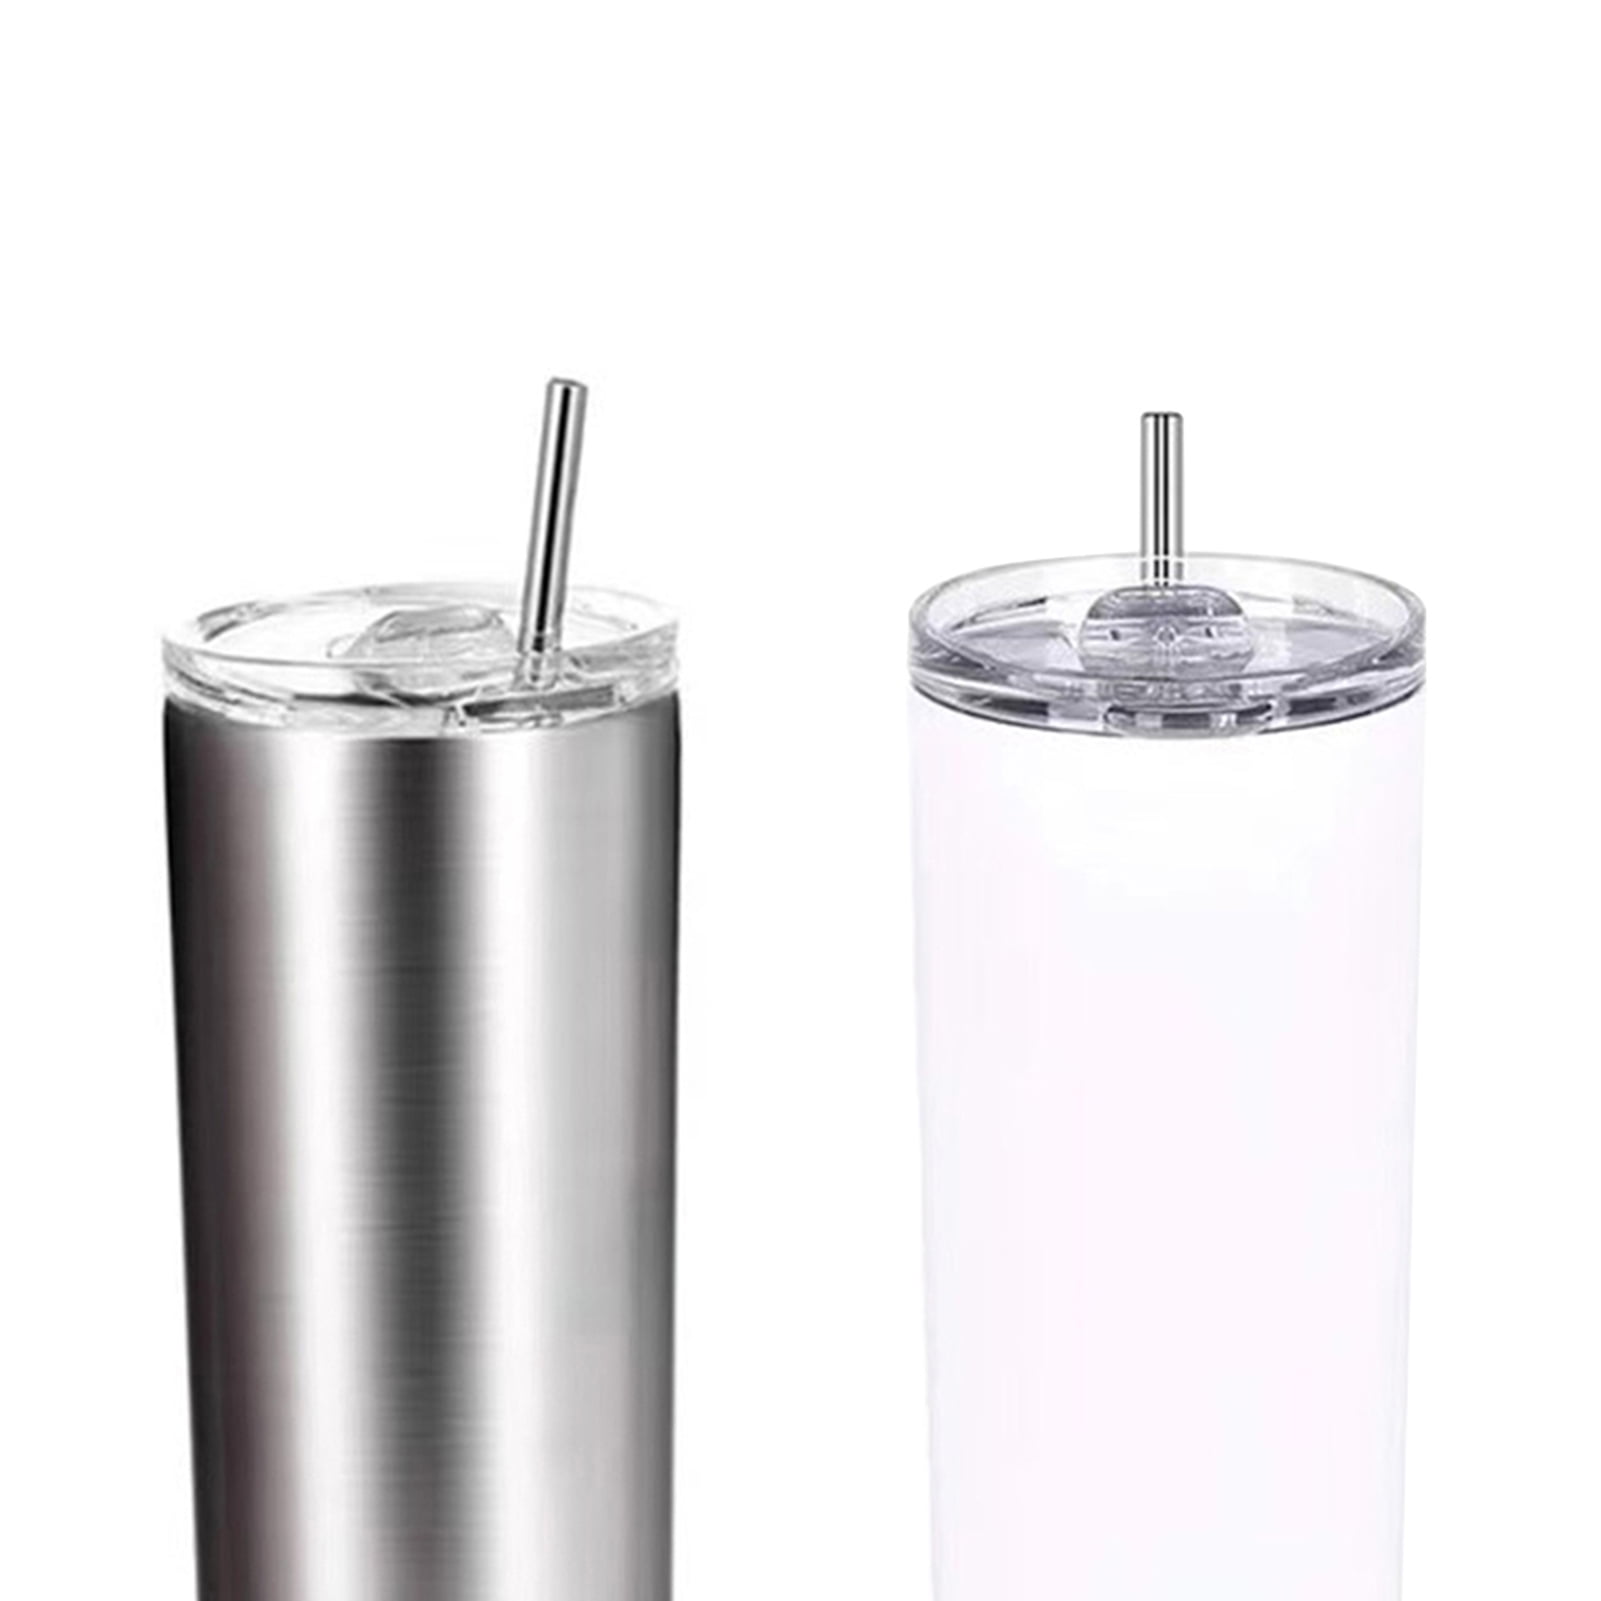 20 oz Tumbler with Straw, Insulated Tumblers with Lid and Straw, 20 oz Cup Stainless Steel Mini Outdoor Sports Travel Tumblers Compatible for